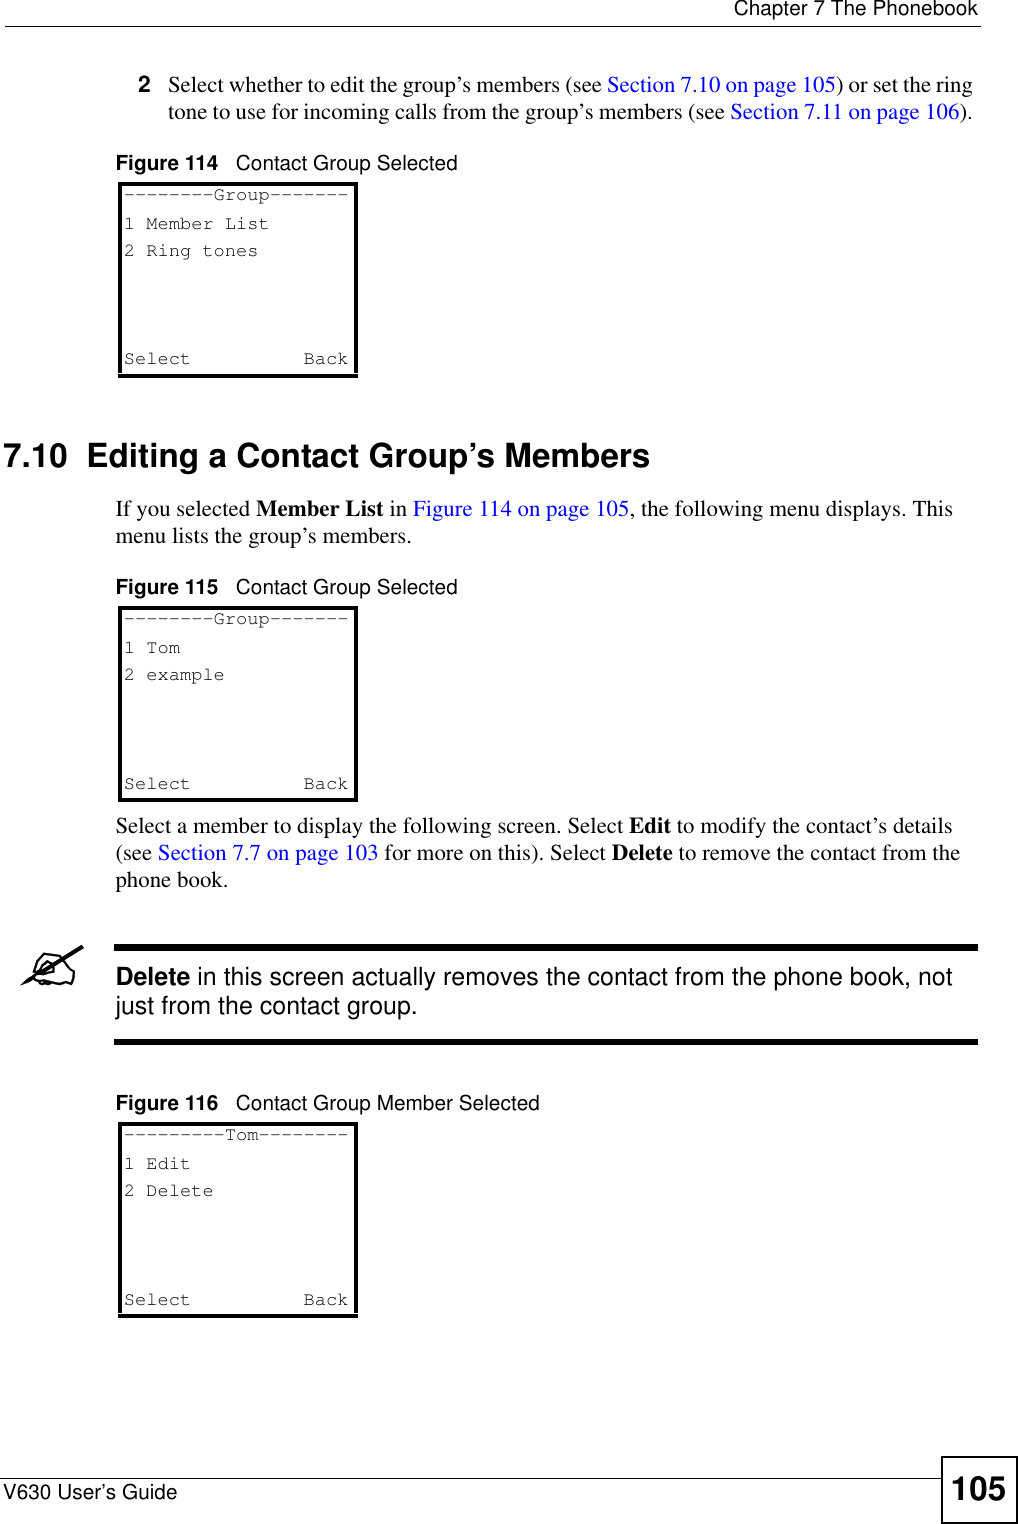  Chapter 7 The PhonebookV630 User’s Guide 1052Select whether to edit the group’s members (see Section 7.10 on page 105) or set the ring tone to use for incoming calls from the group’s members (see Section 7.11 on page 106). Figure 114   Contact Group Selected7.10  Editing a Contact Group’s MembersIf you selected Member List in Figure 114 on page 105, the following menu displays. This menu lists the group’s members.Figure 115   Contact Group SelectedSelect a member to display the following screen. Select Edit to modify the contact’s details (see Section 7.7 on page 103 for more on this). Select Delete to remove the contact from the phone book.&quot;Delete in this screen actually removes the contact from the phone book, not just from the contact group.Figure 116   Contact Group Member Selected--------Group-------1 Member List2 Ring tonesSelect   Back--------Group-------1 Tom2 exampleSelect   Back---------Tom--------1 Edit2 DeleteSelect   Back